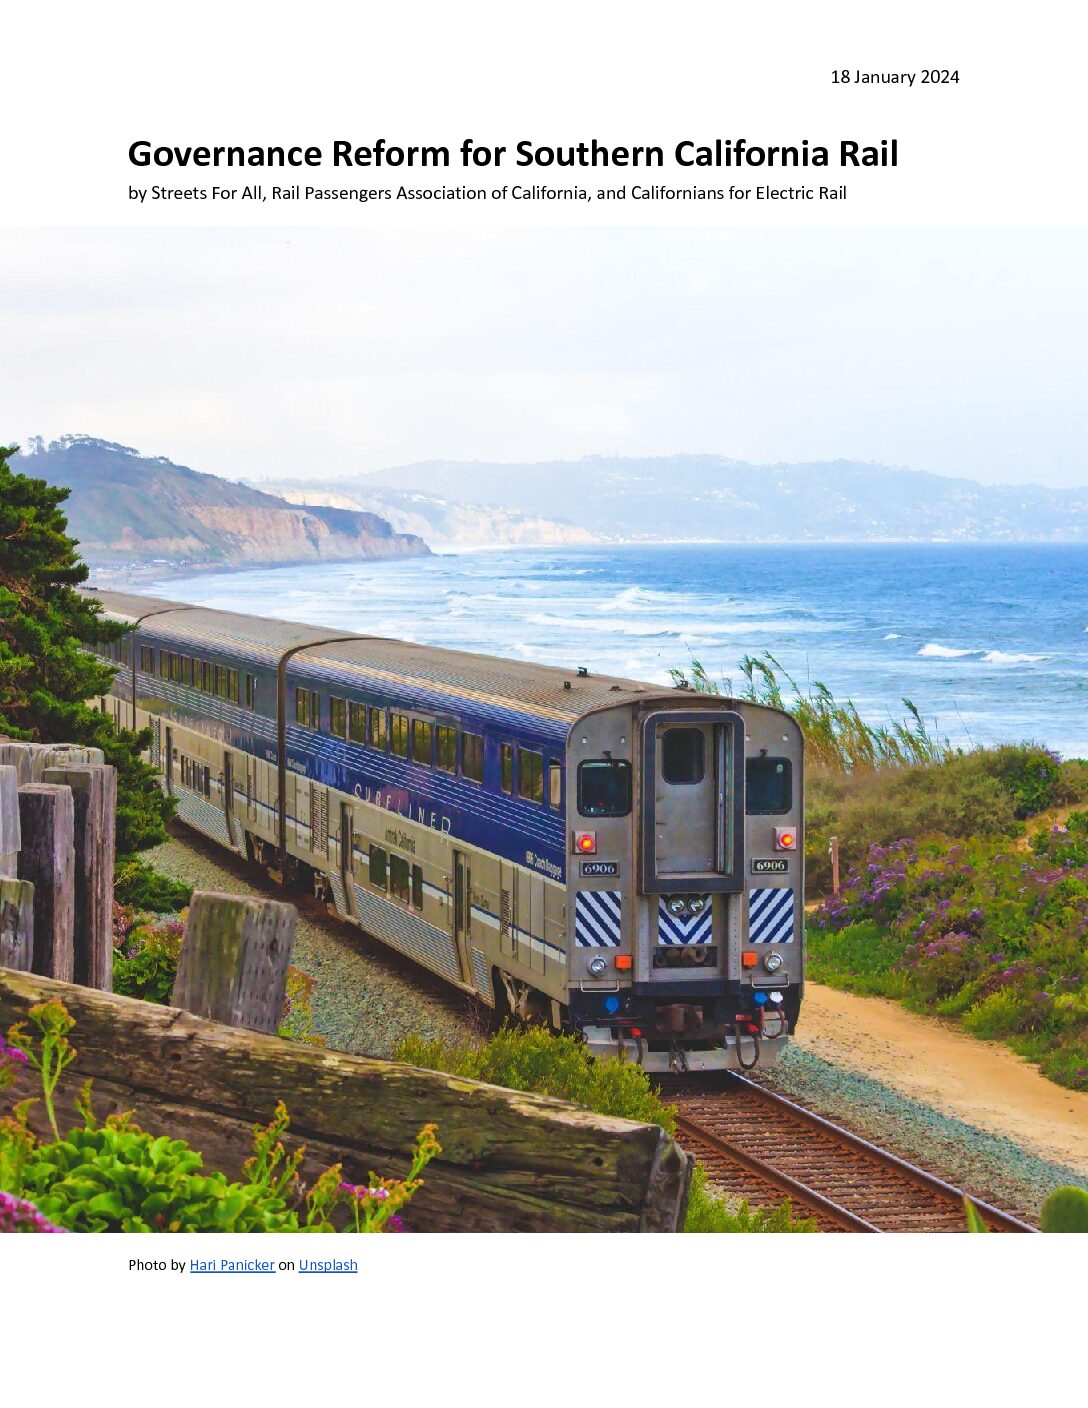 Californians for Electric Rail